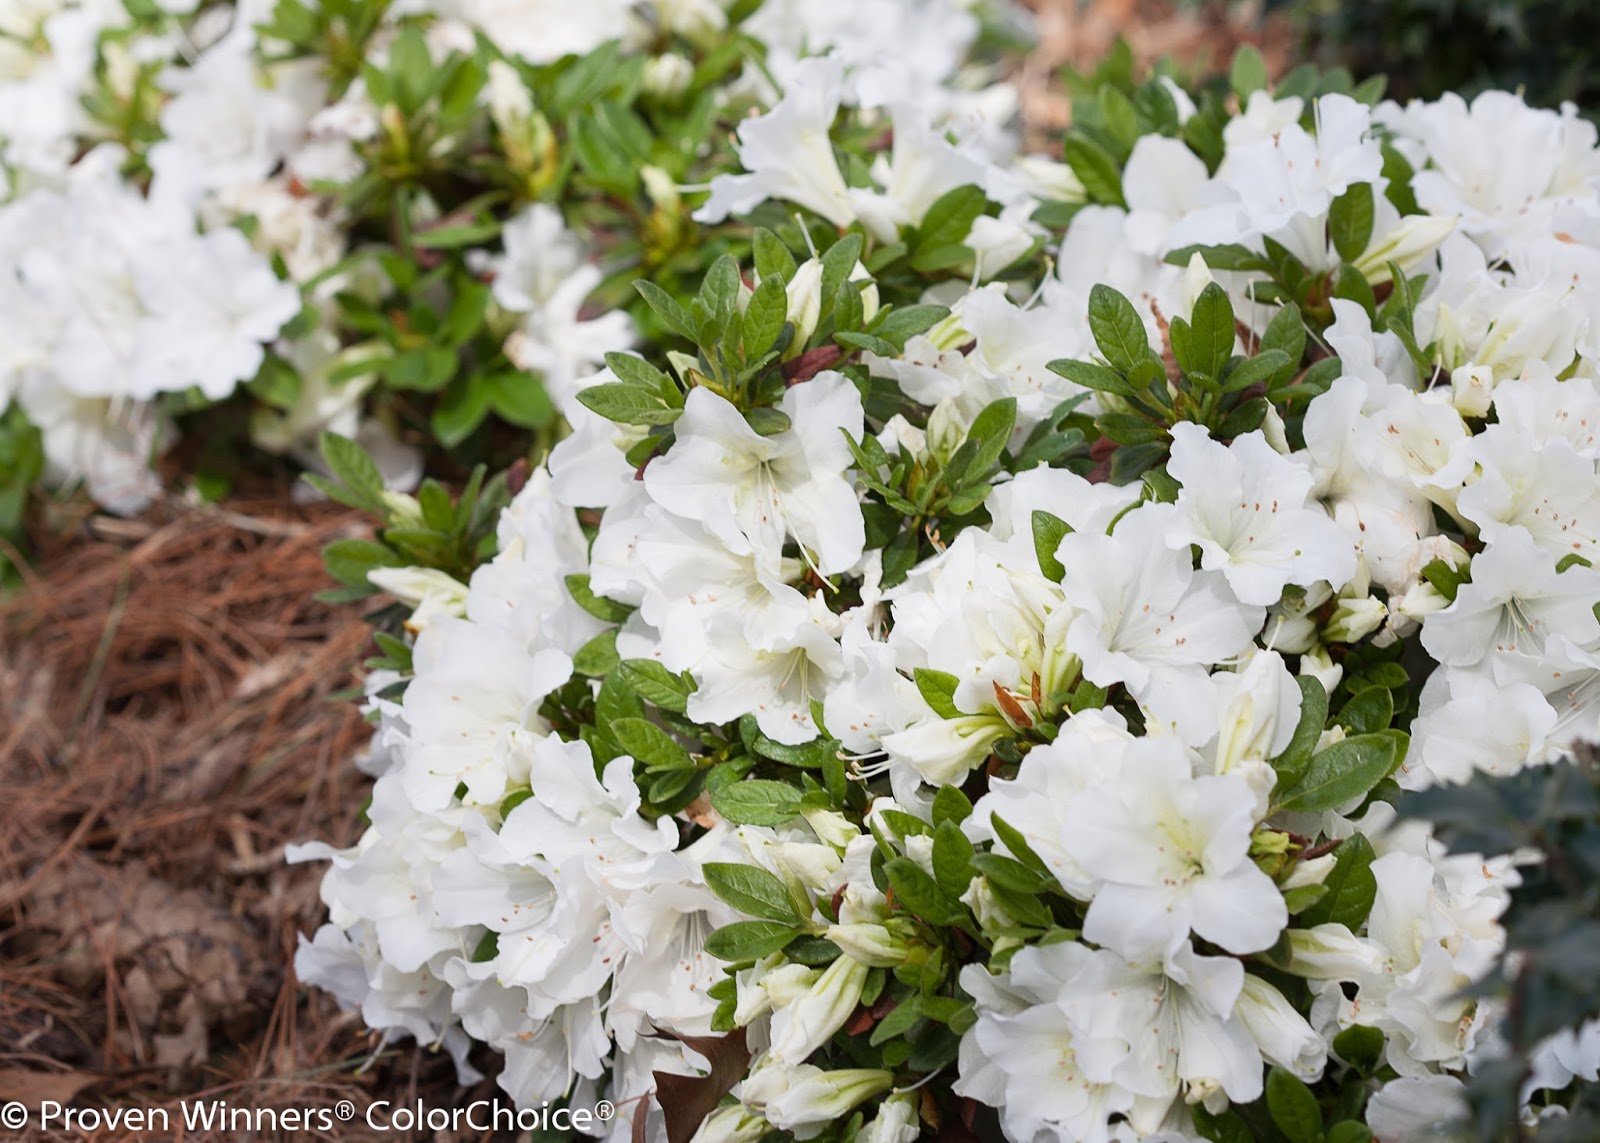 Proven Winners® ColorChoice® Plant of the Week 20